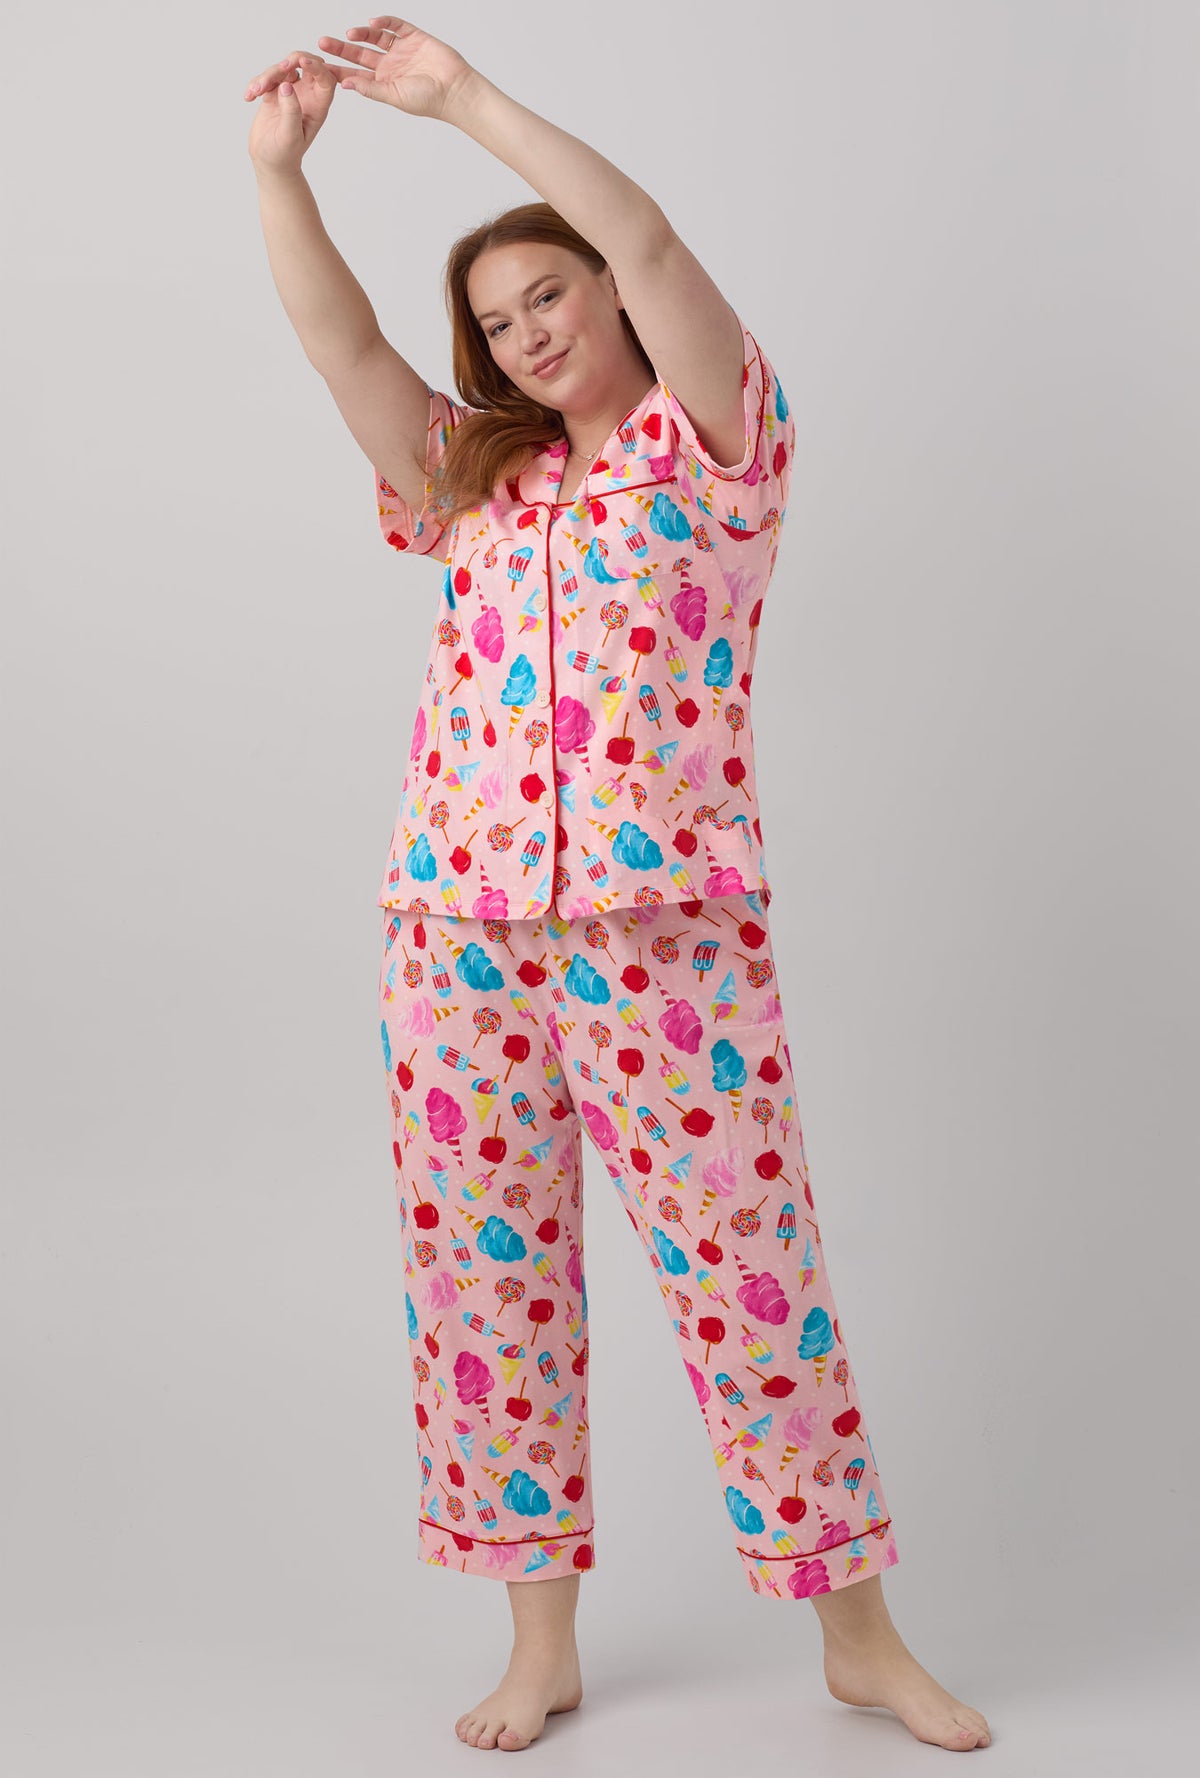 A lady wearing Short Sleeve Classic Stretch Jersey Cropped PJ Set with sweet treats print